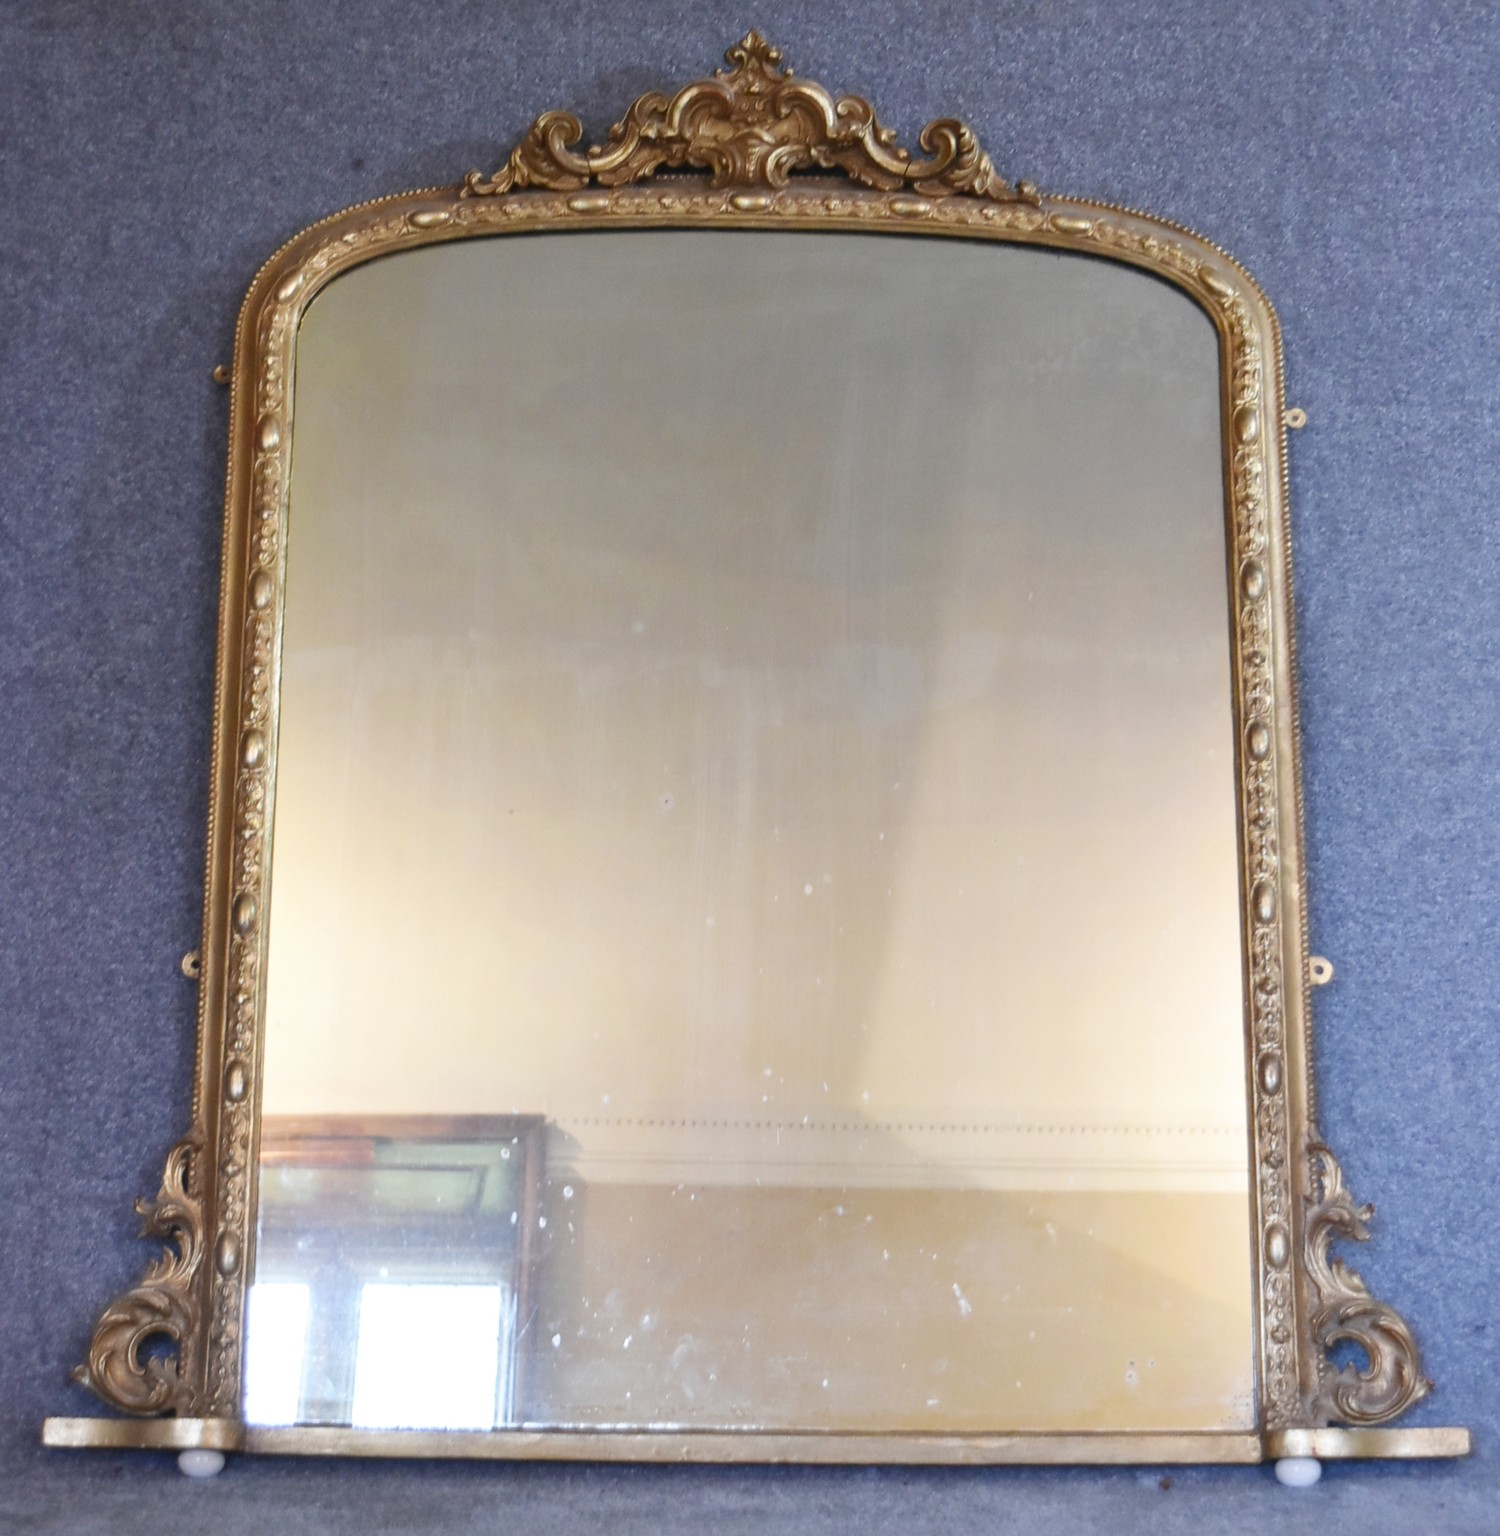 A 19th century carved giltwood overmantel mirror with scrolling foliate cresting above original